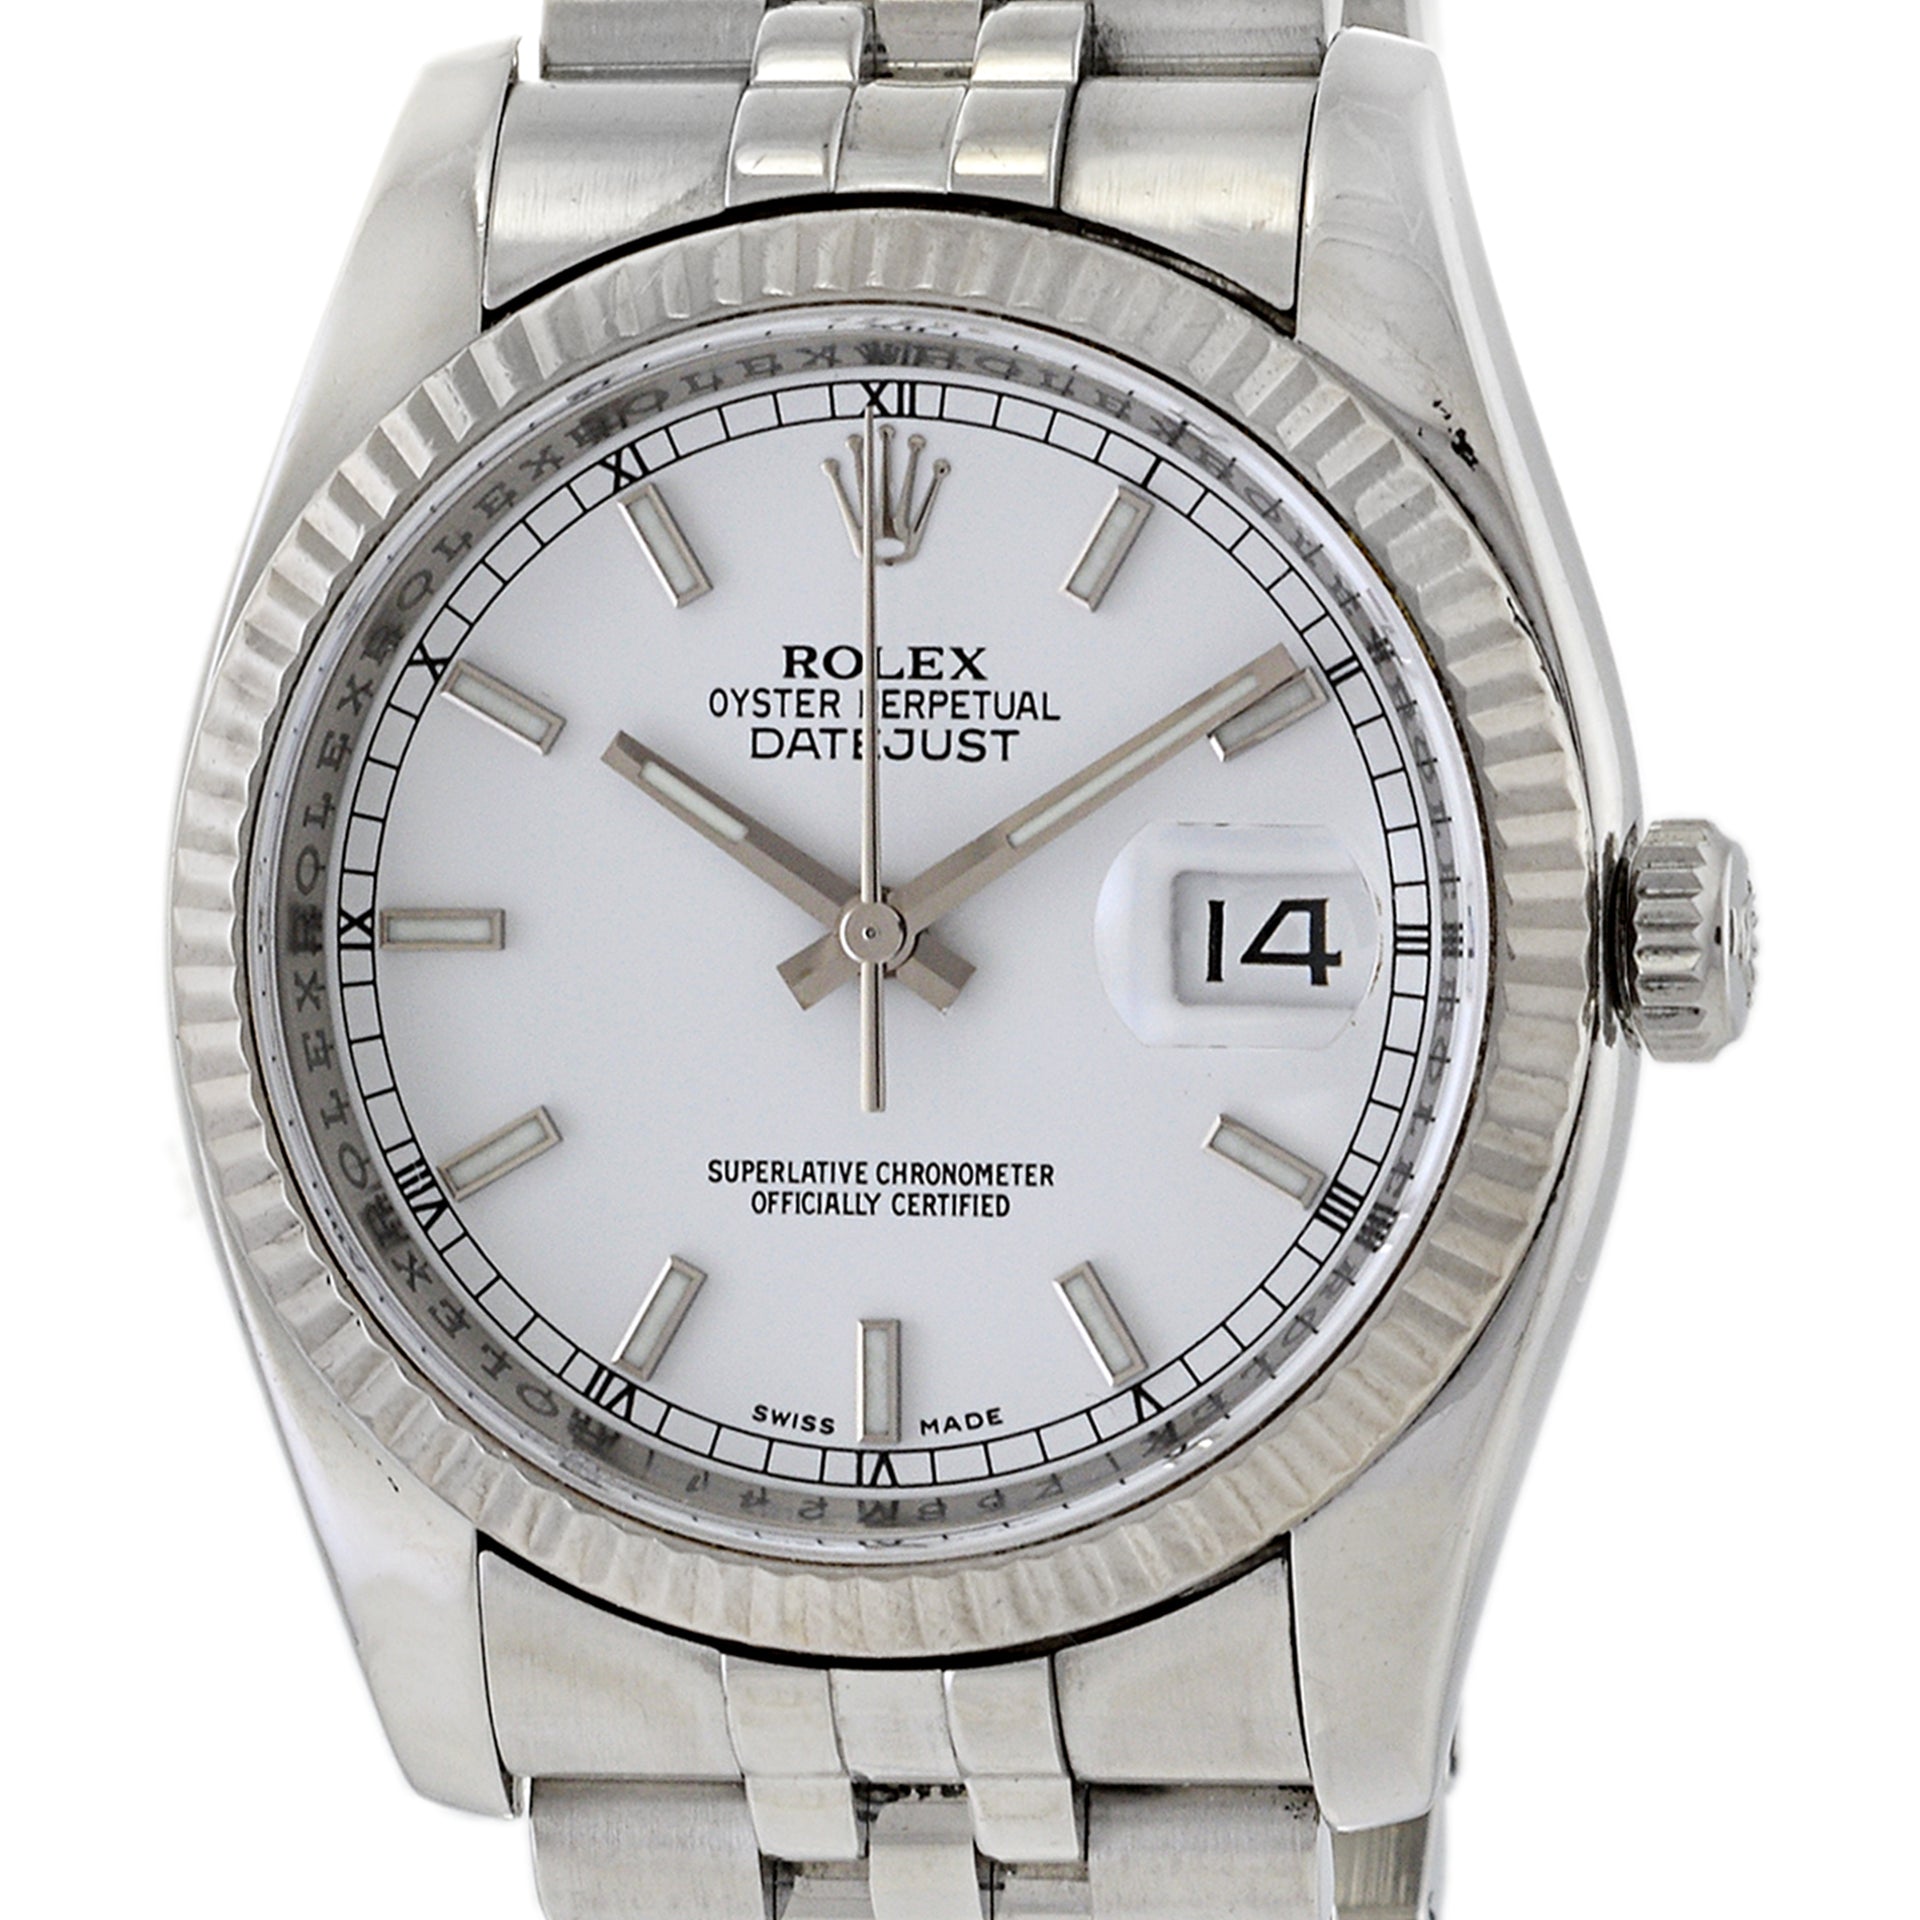 Rolex Datejust 36 Reference 116234